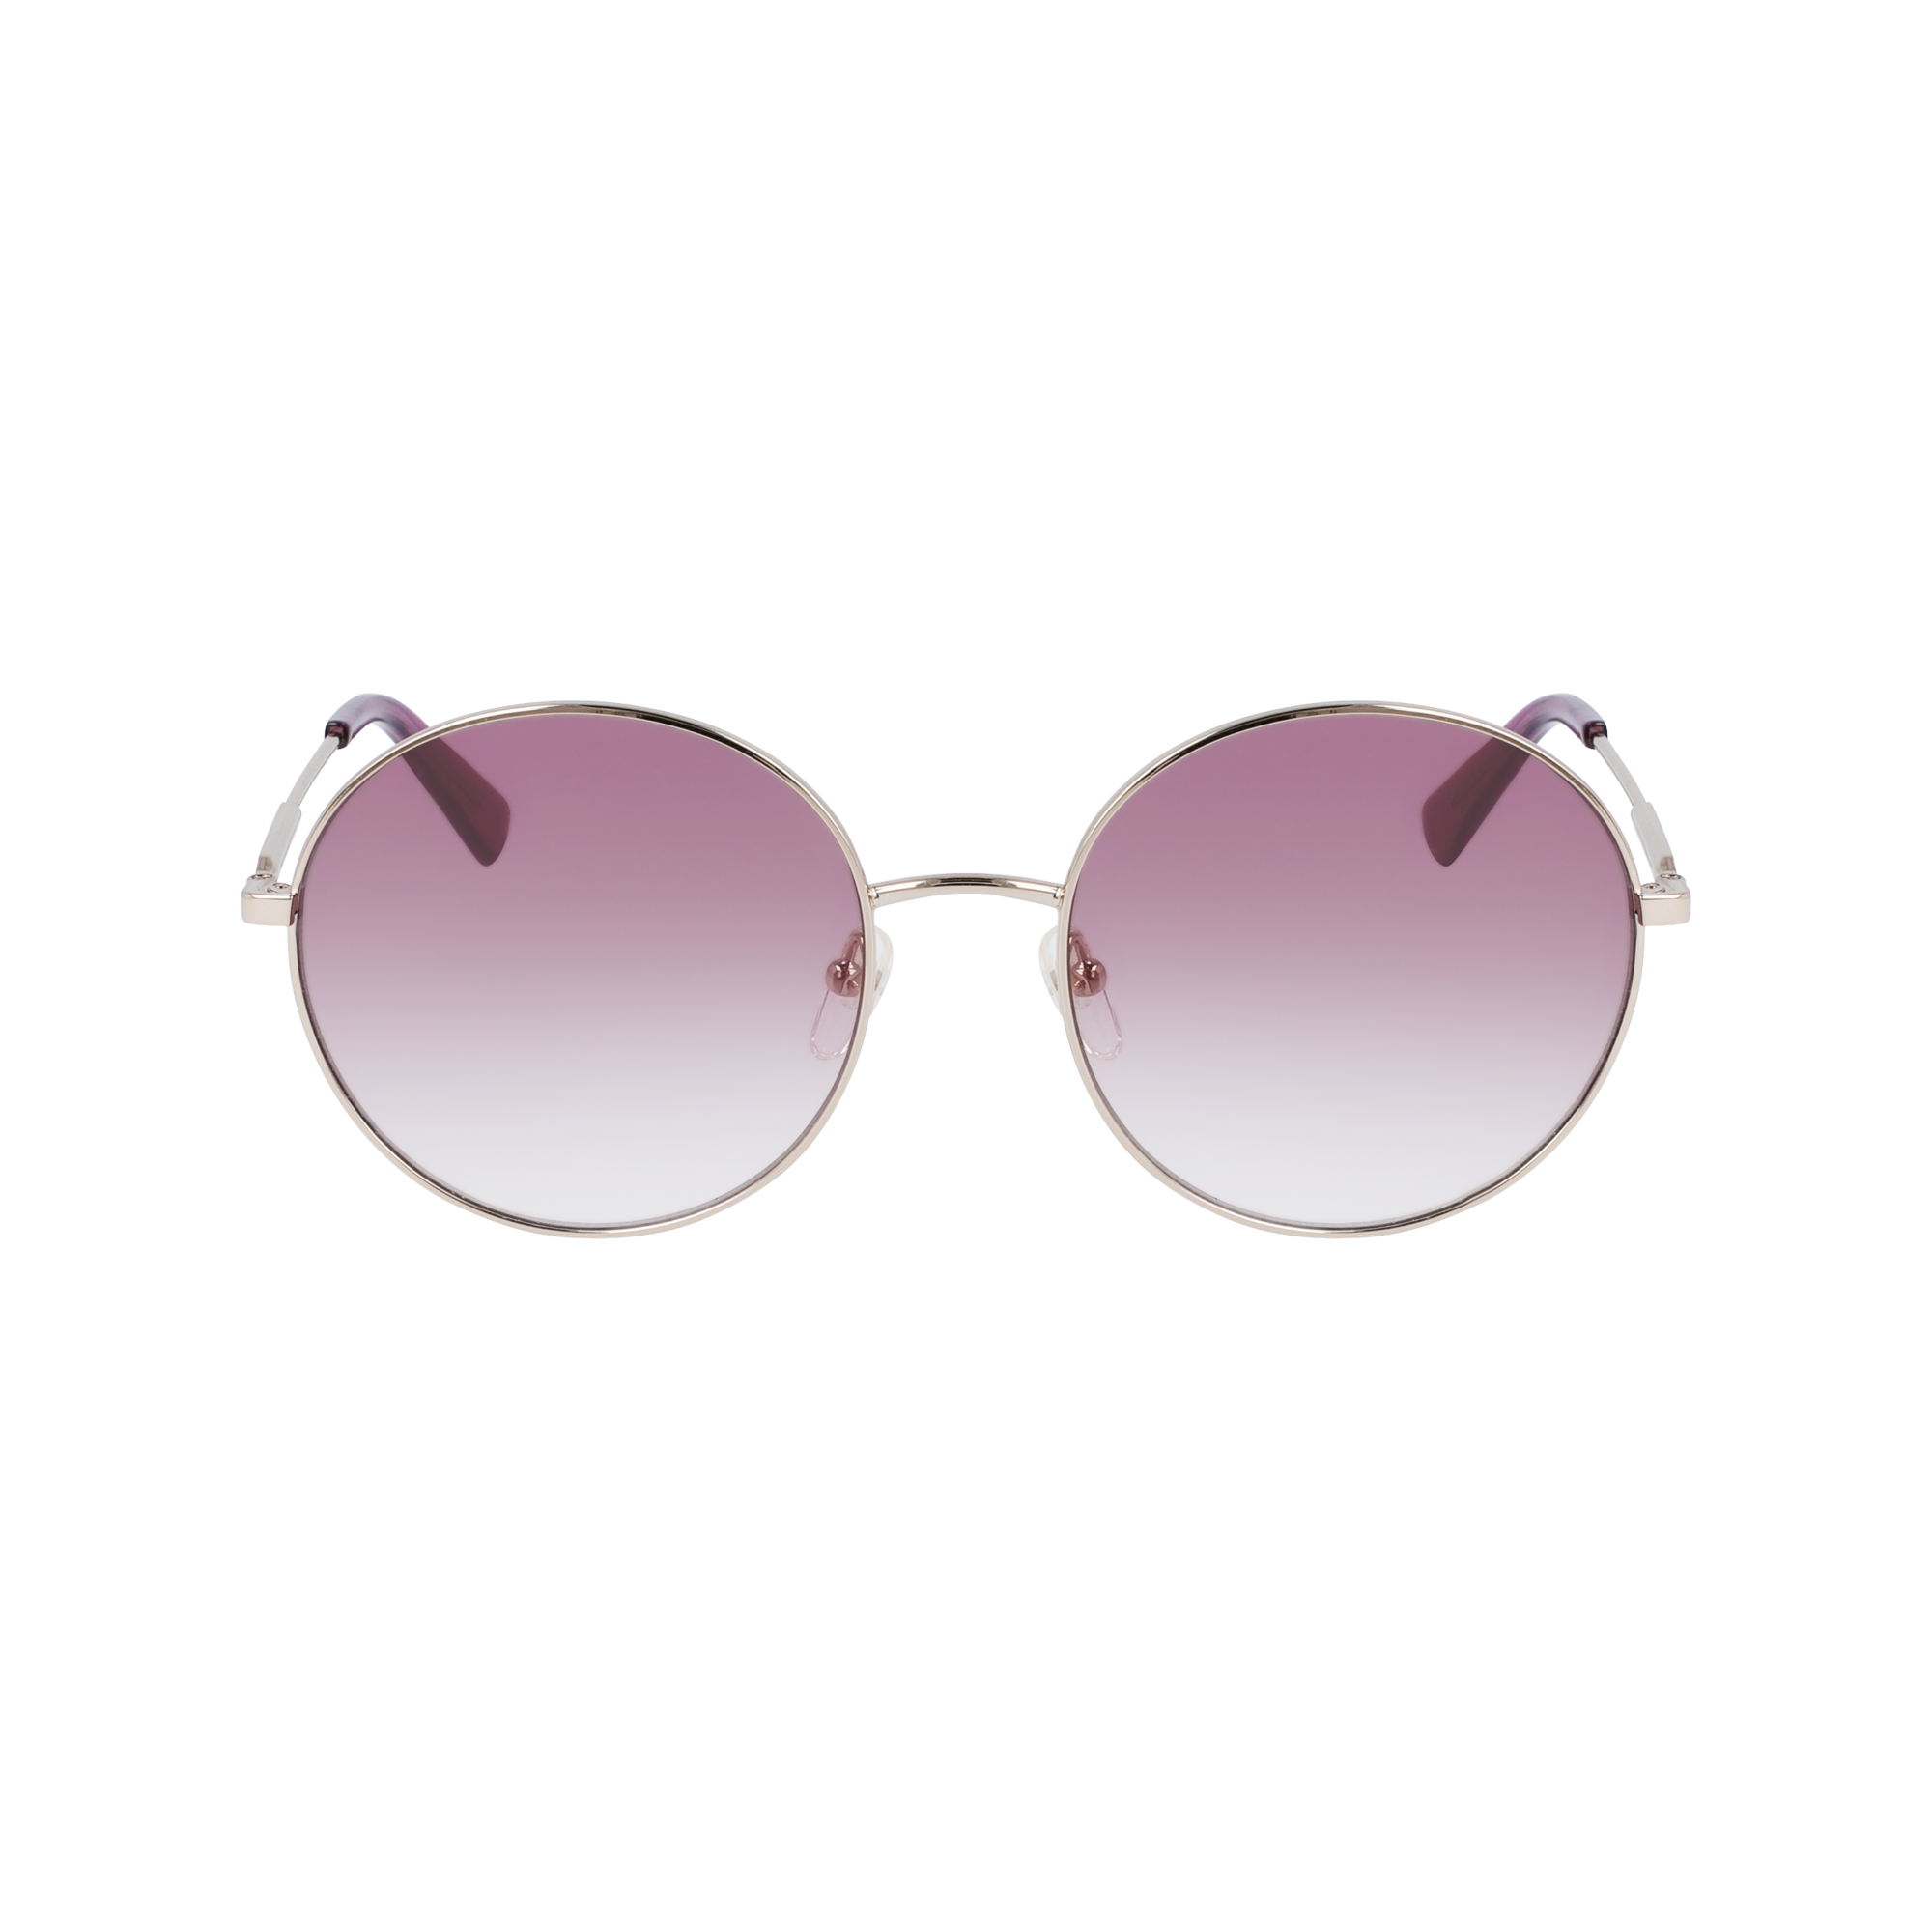 Sunglasses Fall-Winter 2020 Collection 